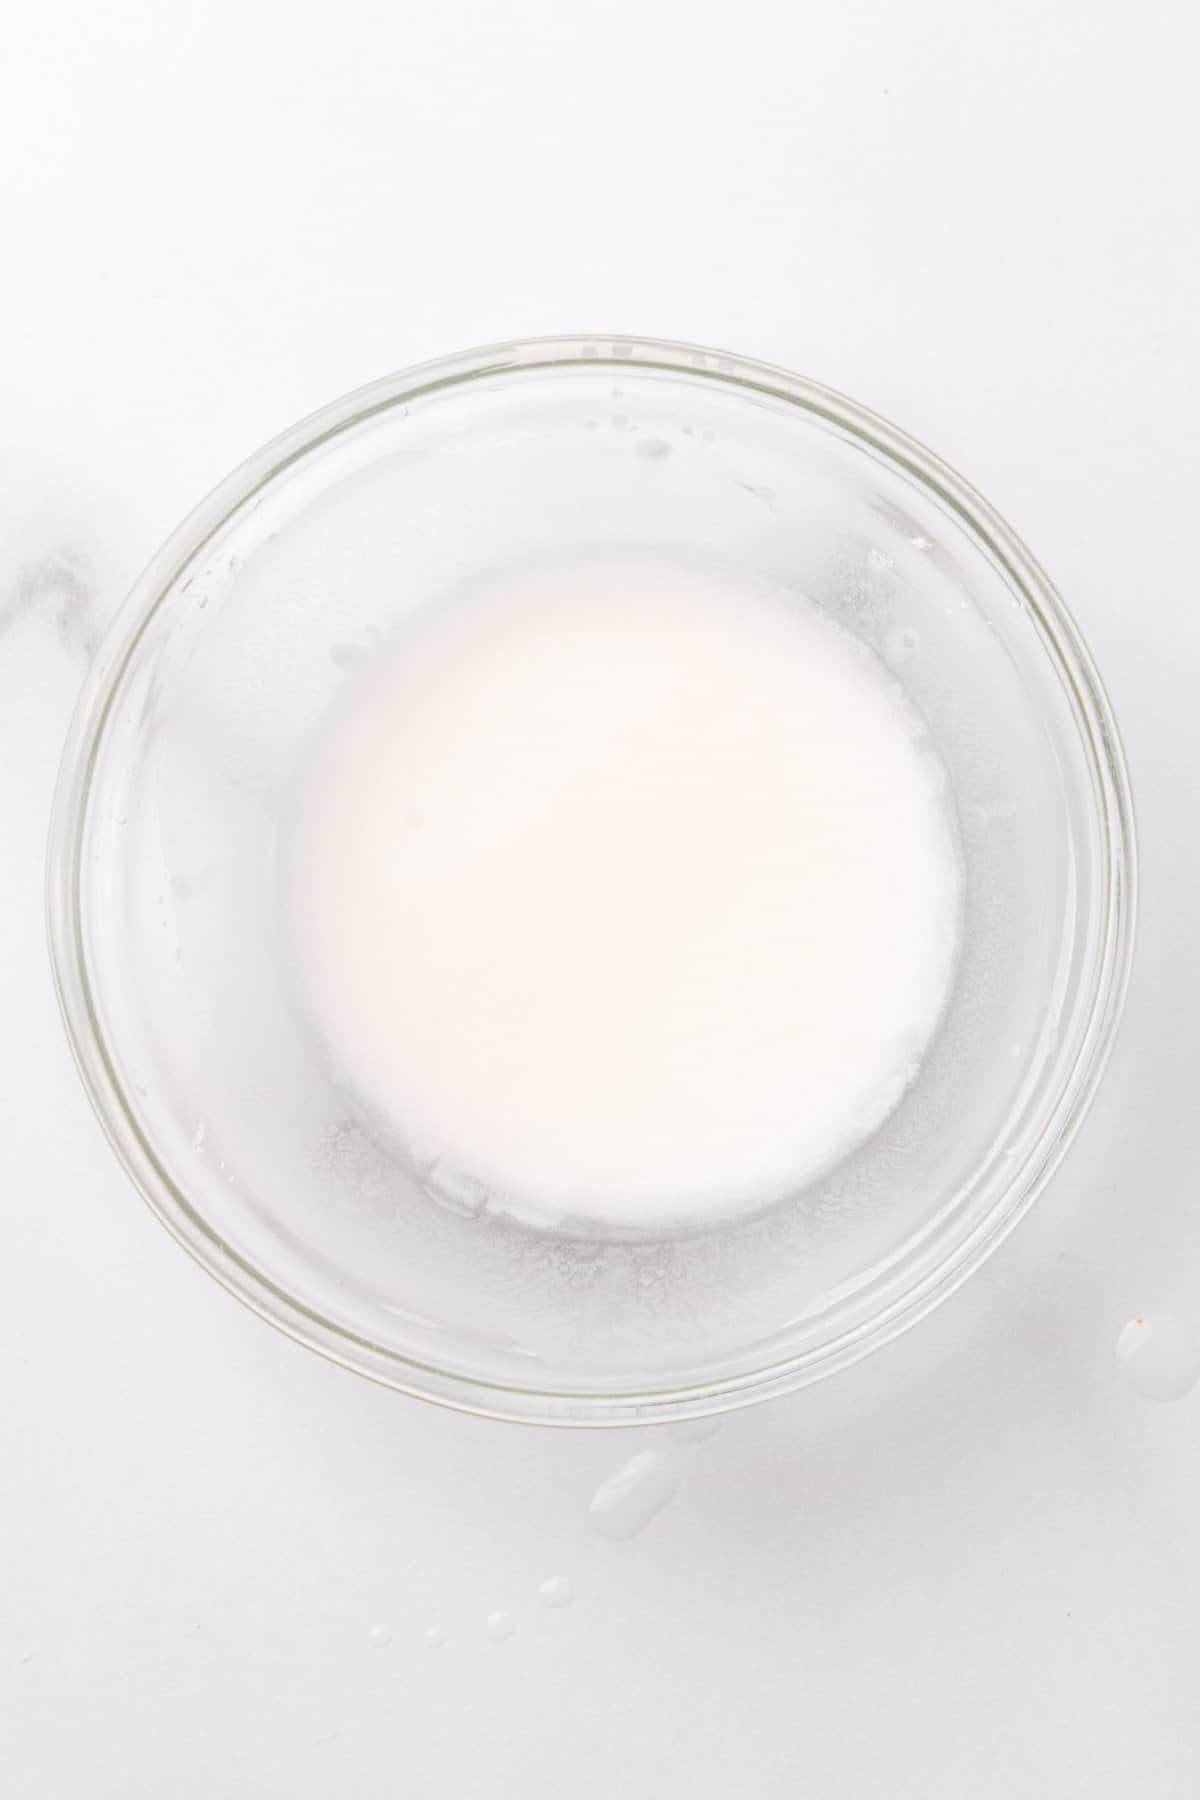 Cornstarch paste in a glass bowl on a white surface, as seen from above